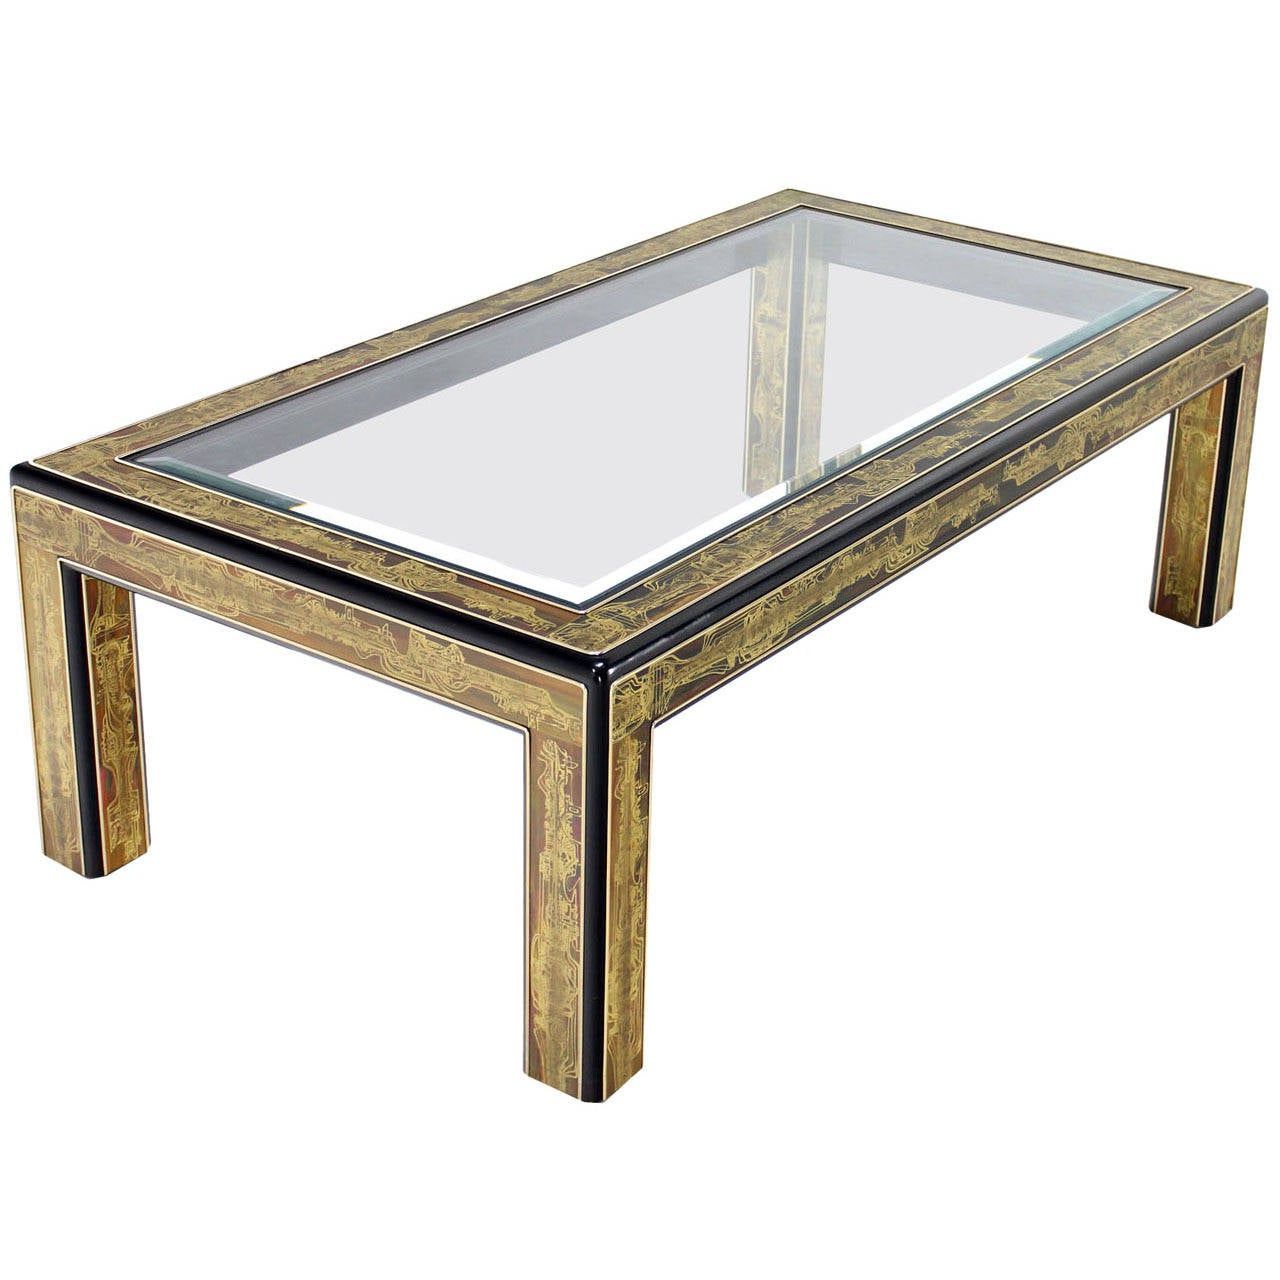 Rectangular Glass Top Brass And Wood Base Coffee Table Inside Well Known Espresso Wood And Glass Top Coffee Tables (Gallery 19 of 20)